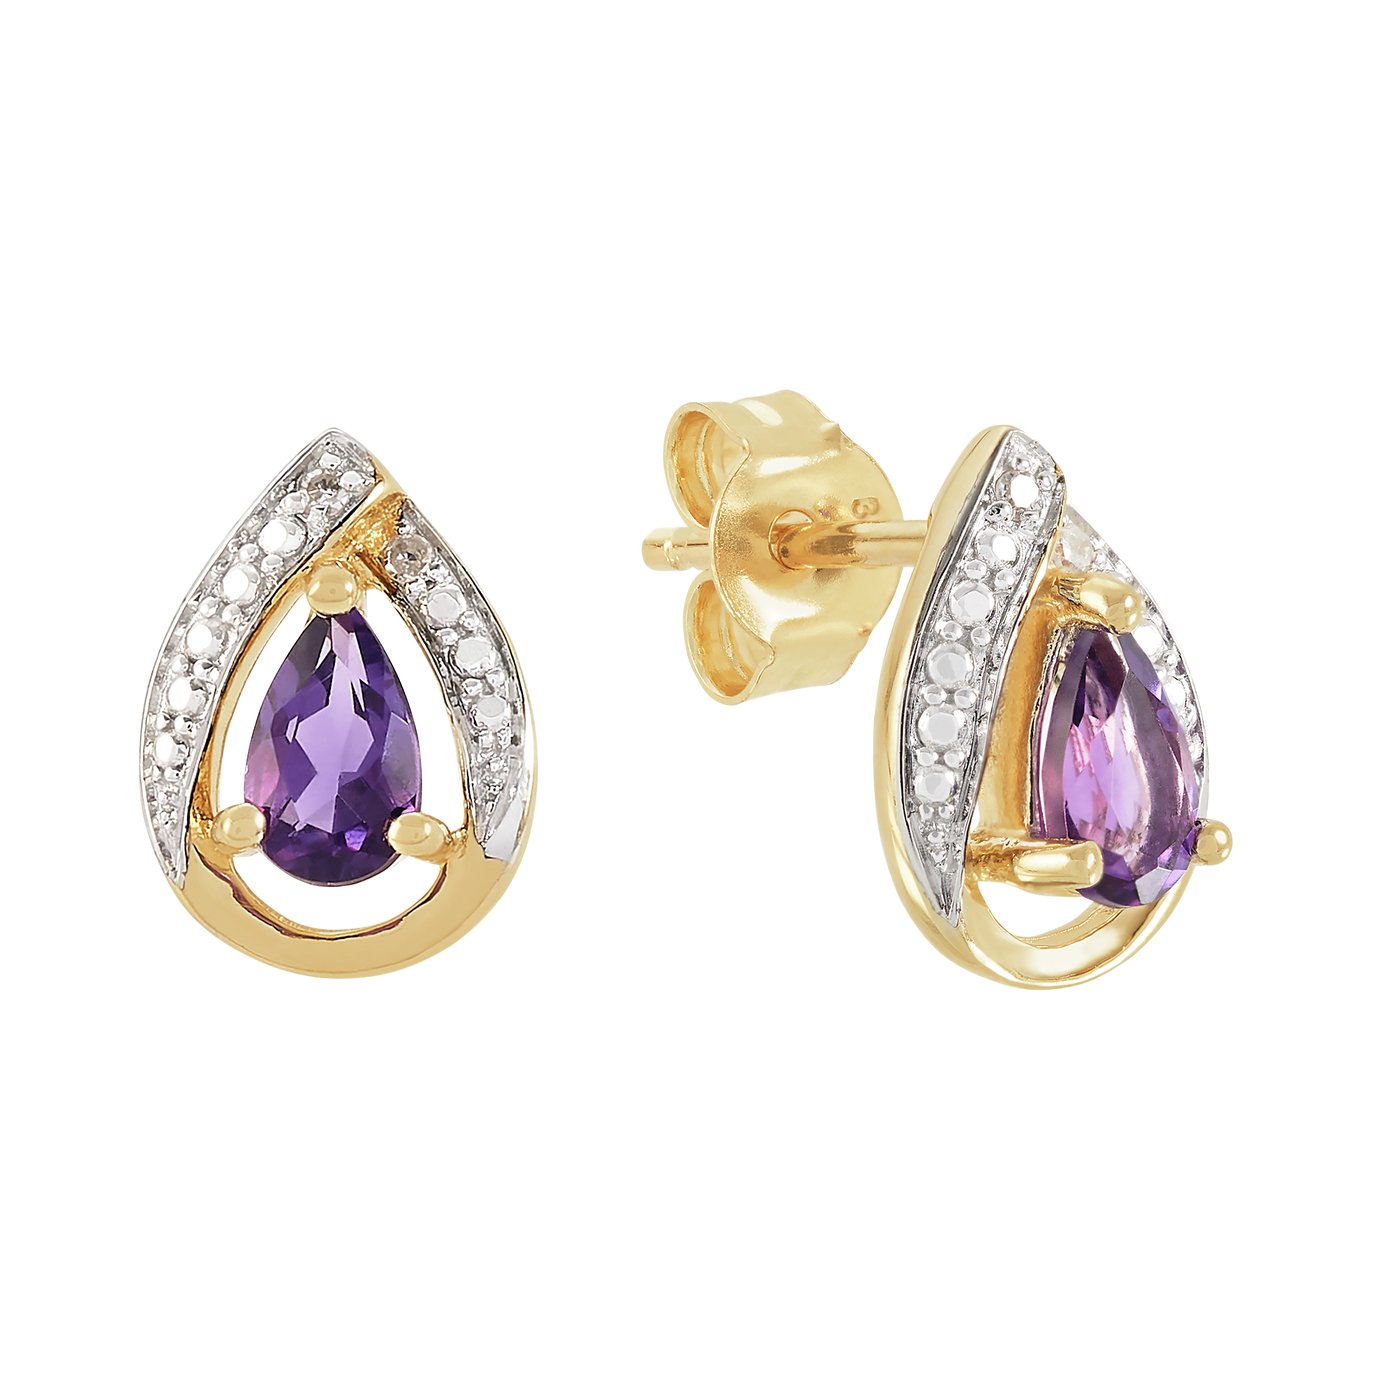 Revere 9ct Yellow Gold Amethyst Stone Stud Earrings Review